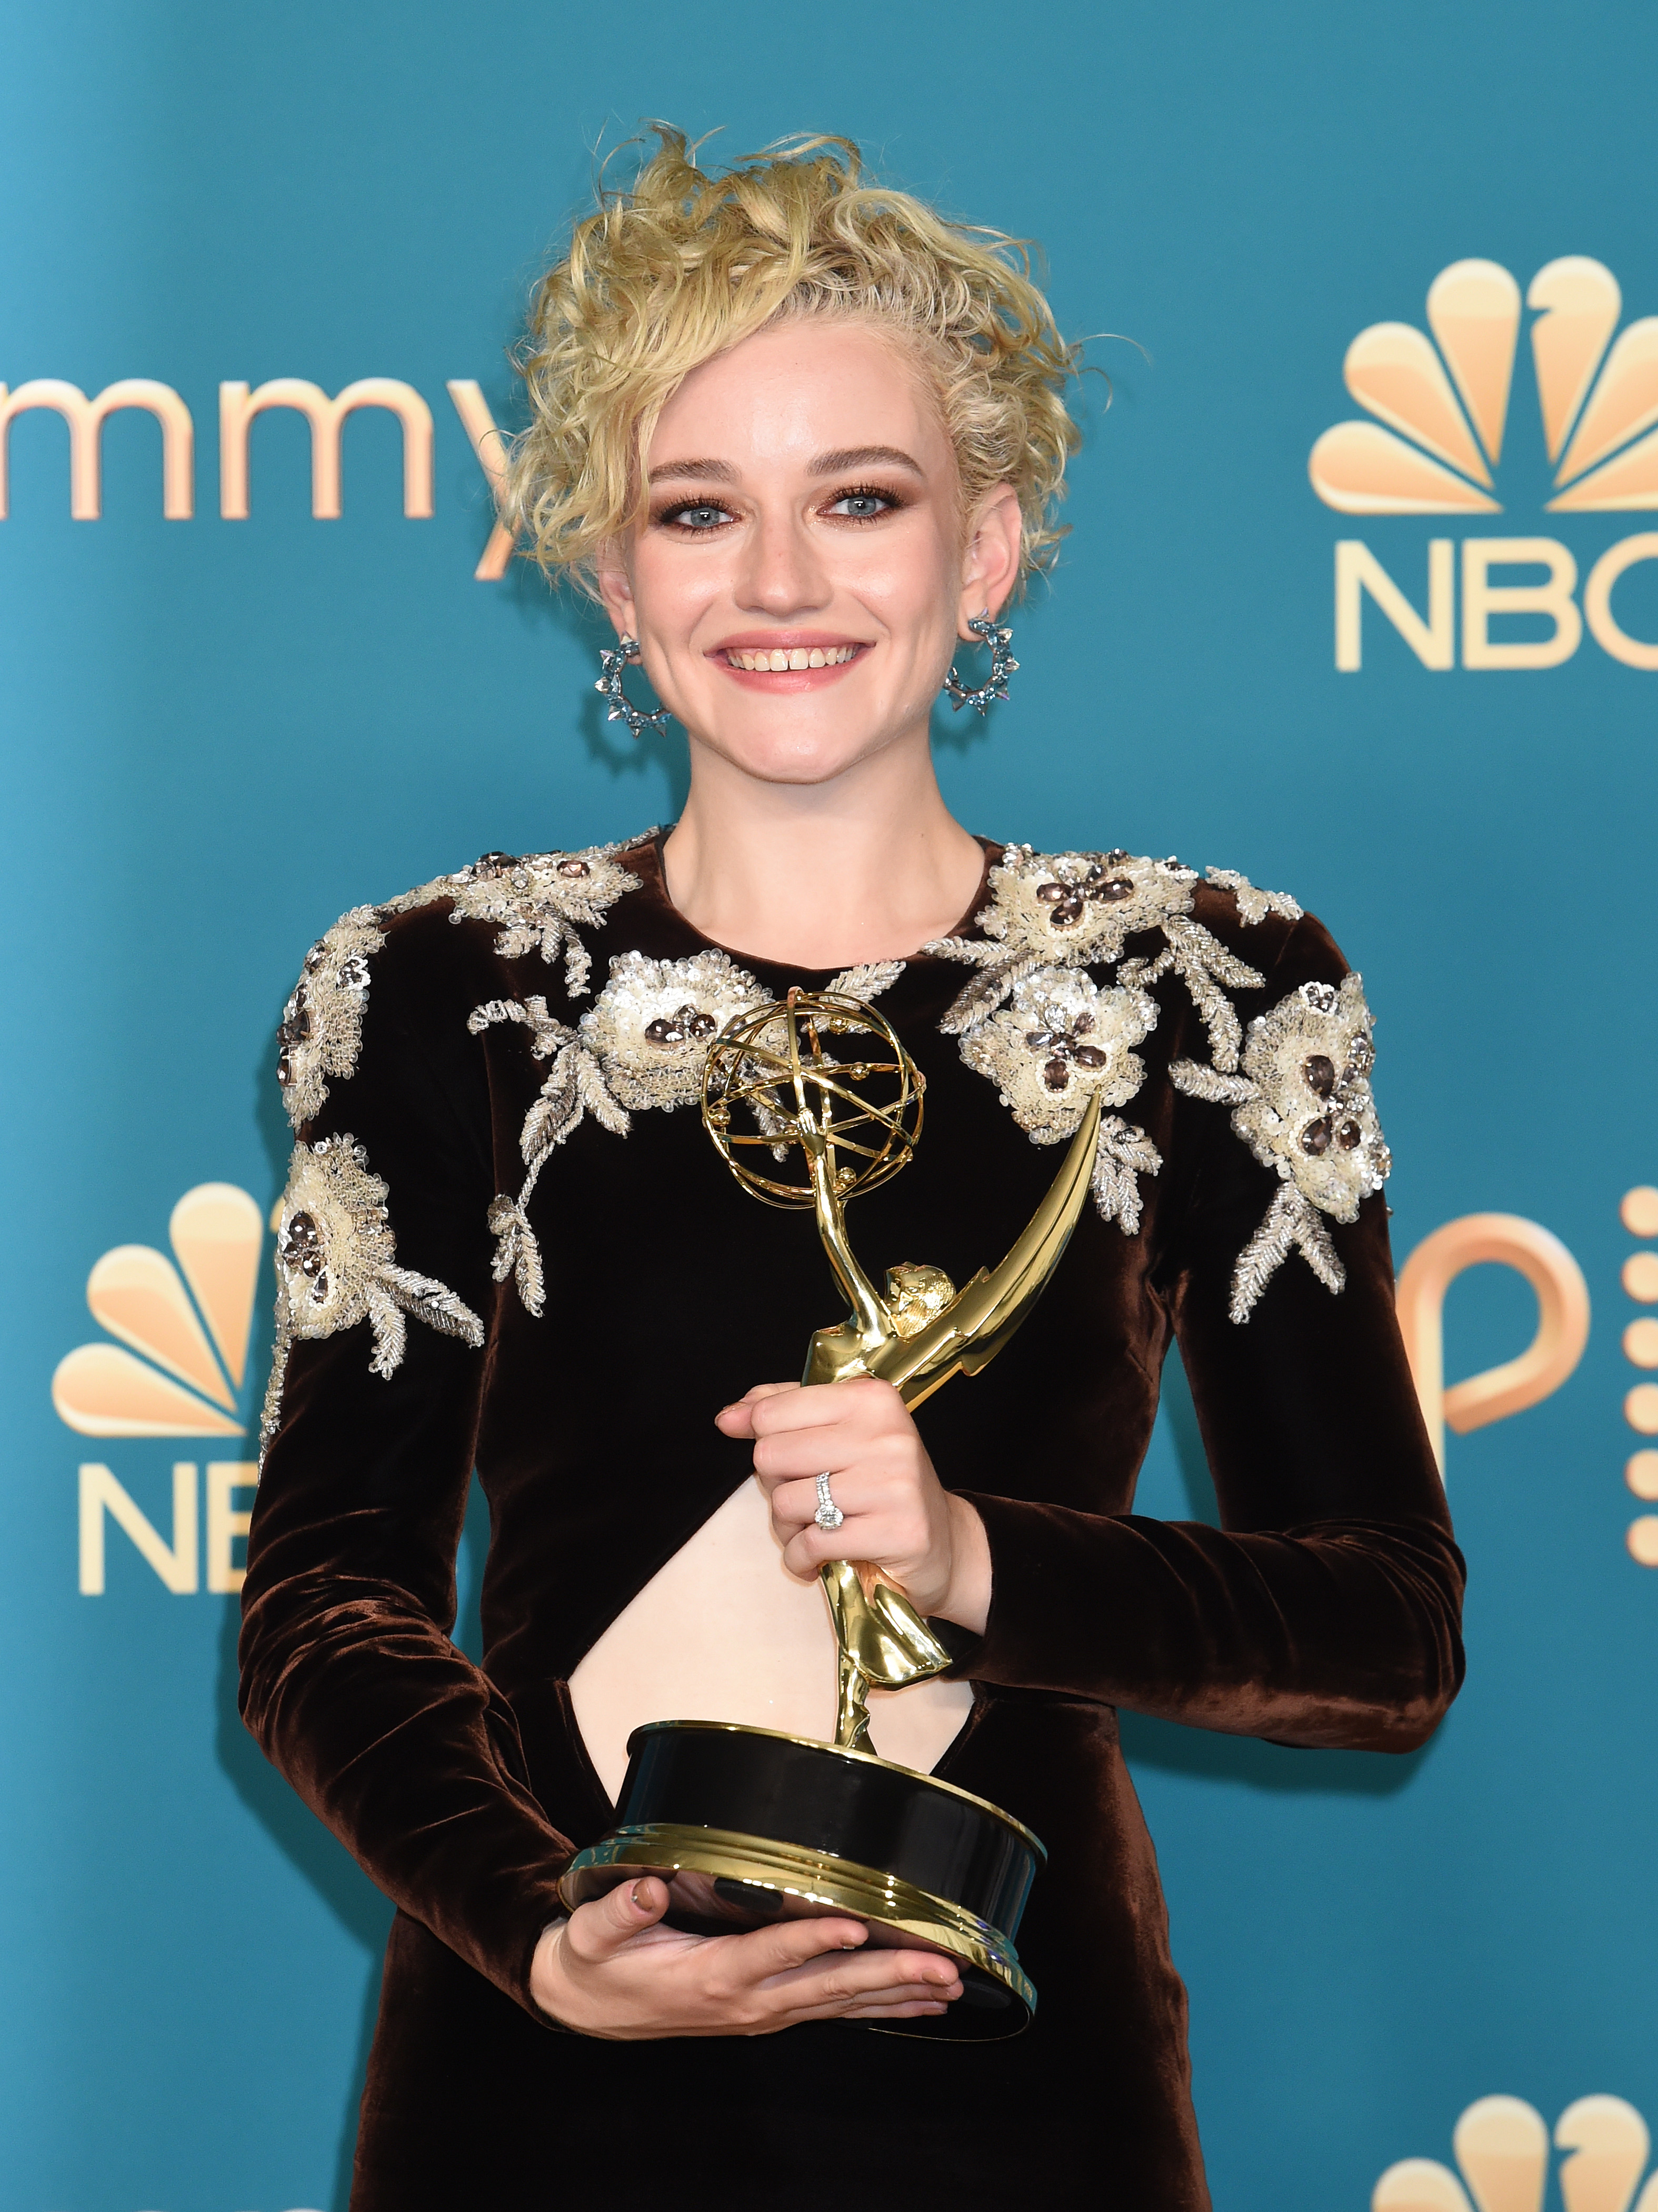 Julia Garner holds her Emmy trophy at the 74th Primetime Emmy Awards held at Microsoft Theater on September 12, 2022, in Los Angeles, California. | Source: Getty Images